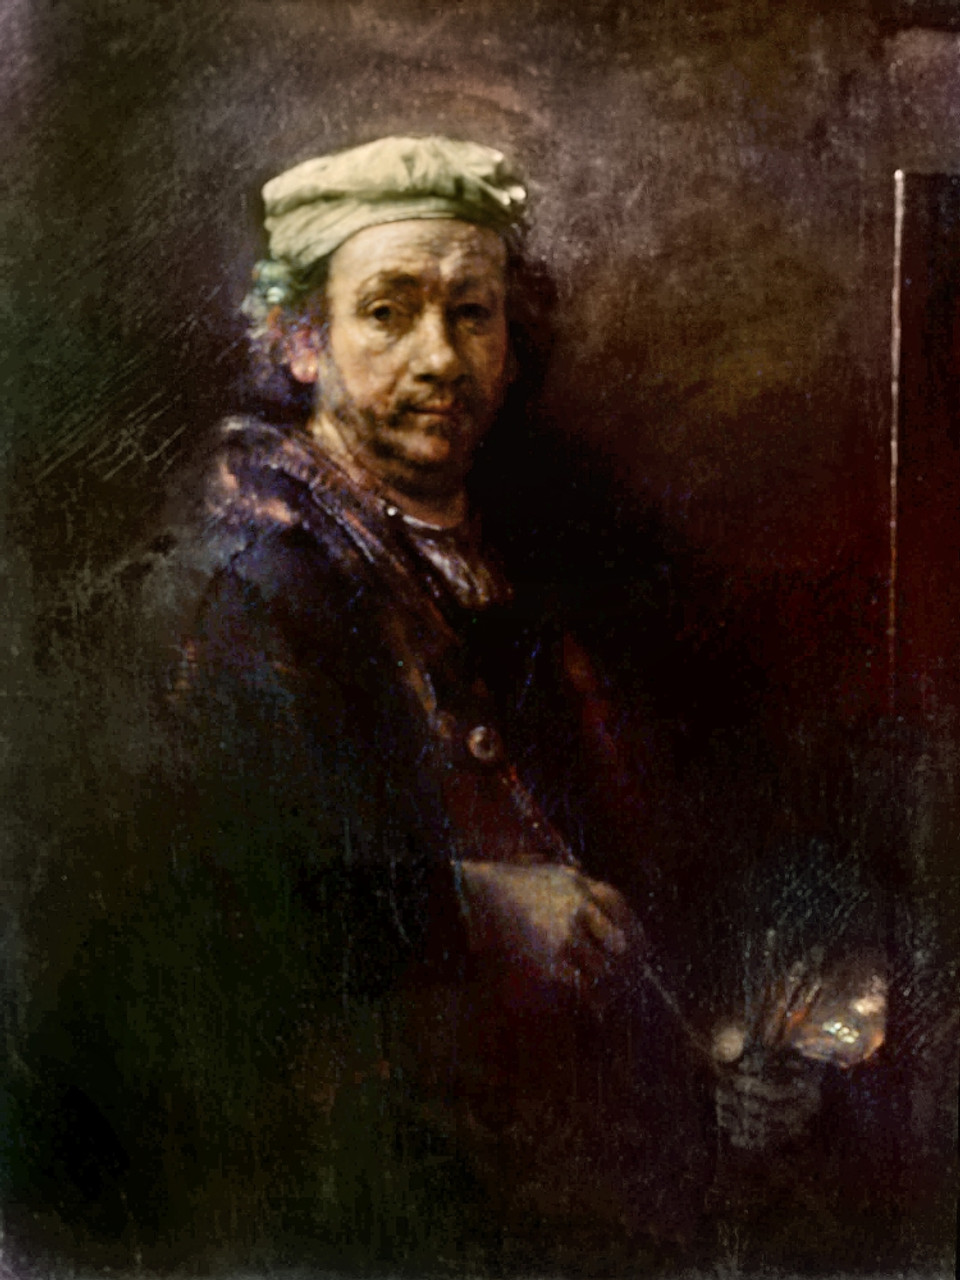 Rembrandt: Self-Portrait. By Van Oil Posterazzi by Print VARGRC0054419 /Nself-Portrait His - Granger Rembrandt At 1660. Canvas Rijn, Poster - Easel. # On Item Collection